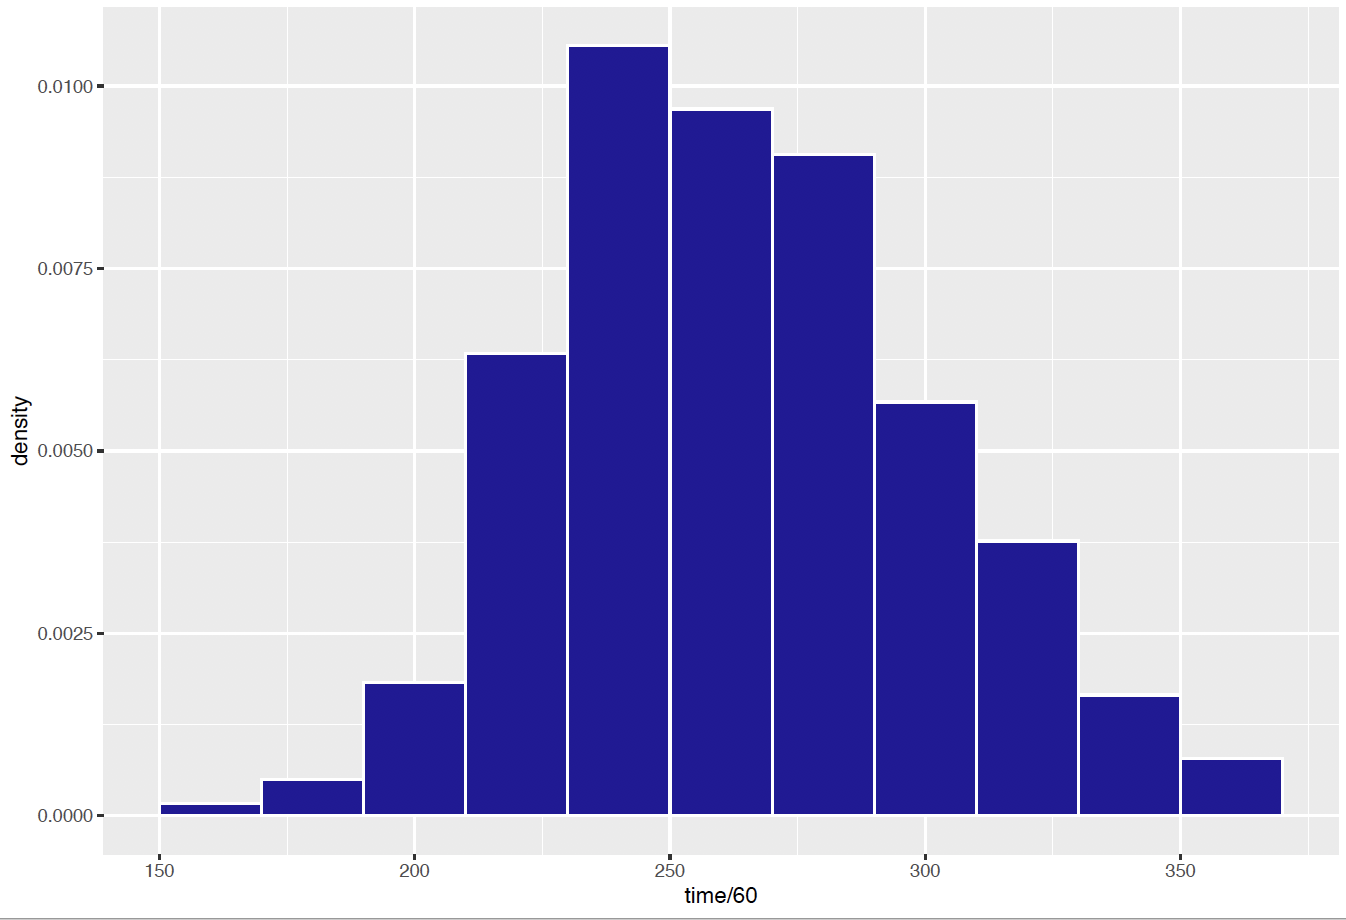 Histogram of women's completion times in the Grandma's Marathon.